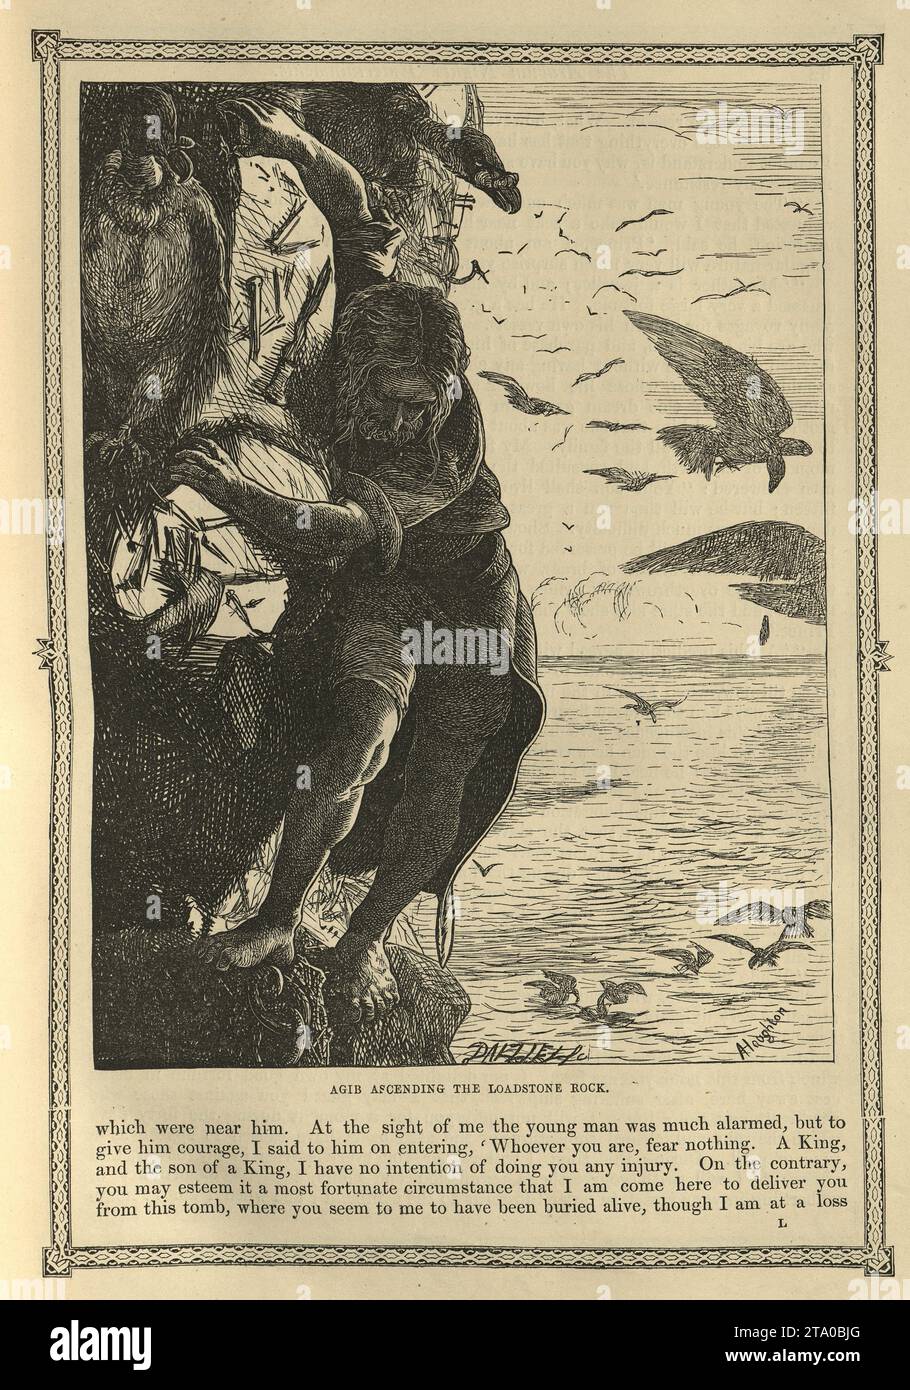 Vintage illustration One Thousand and One Nights, Agib ascending the Loadstone Rock, Arabian, Middle Eastern folktales, by The Brothers Dalziel. The Story of the Third Calender Stock Photo